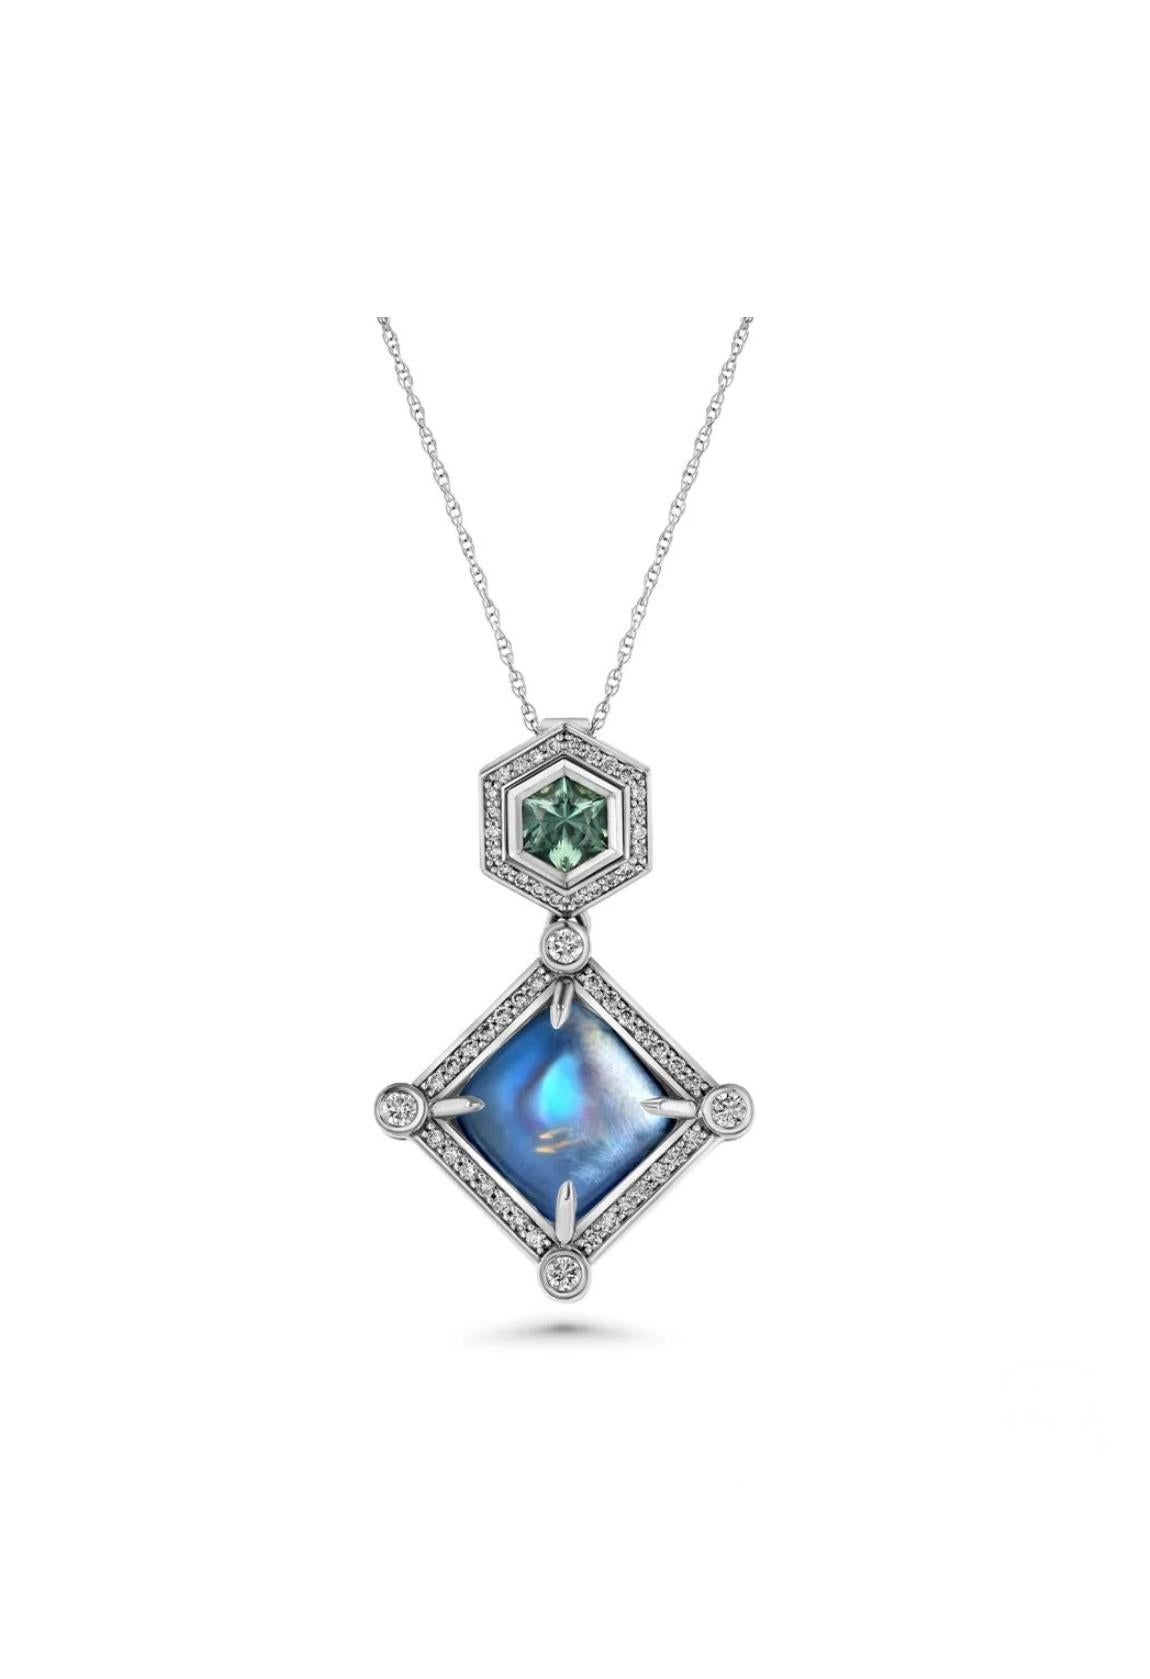 A glowing 6.36-carat, rainbow Moonstone shines with a 0.53-carat, hexagon-cut Montana Sapphire, highlighted with round diamonds totaling 0.38 carats in 18K white gold pendant. 